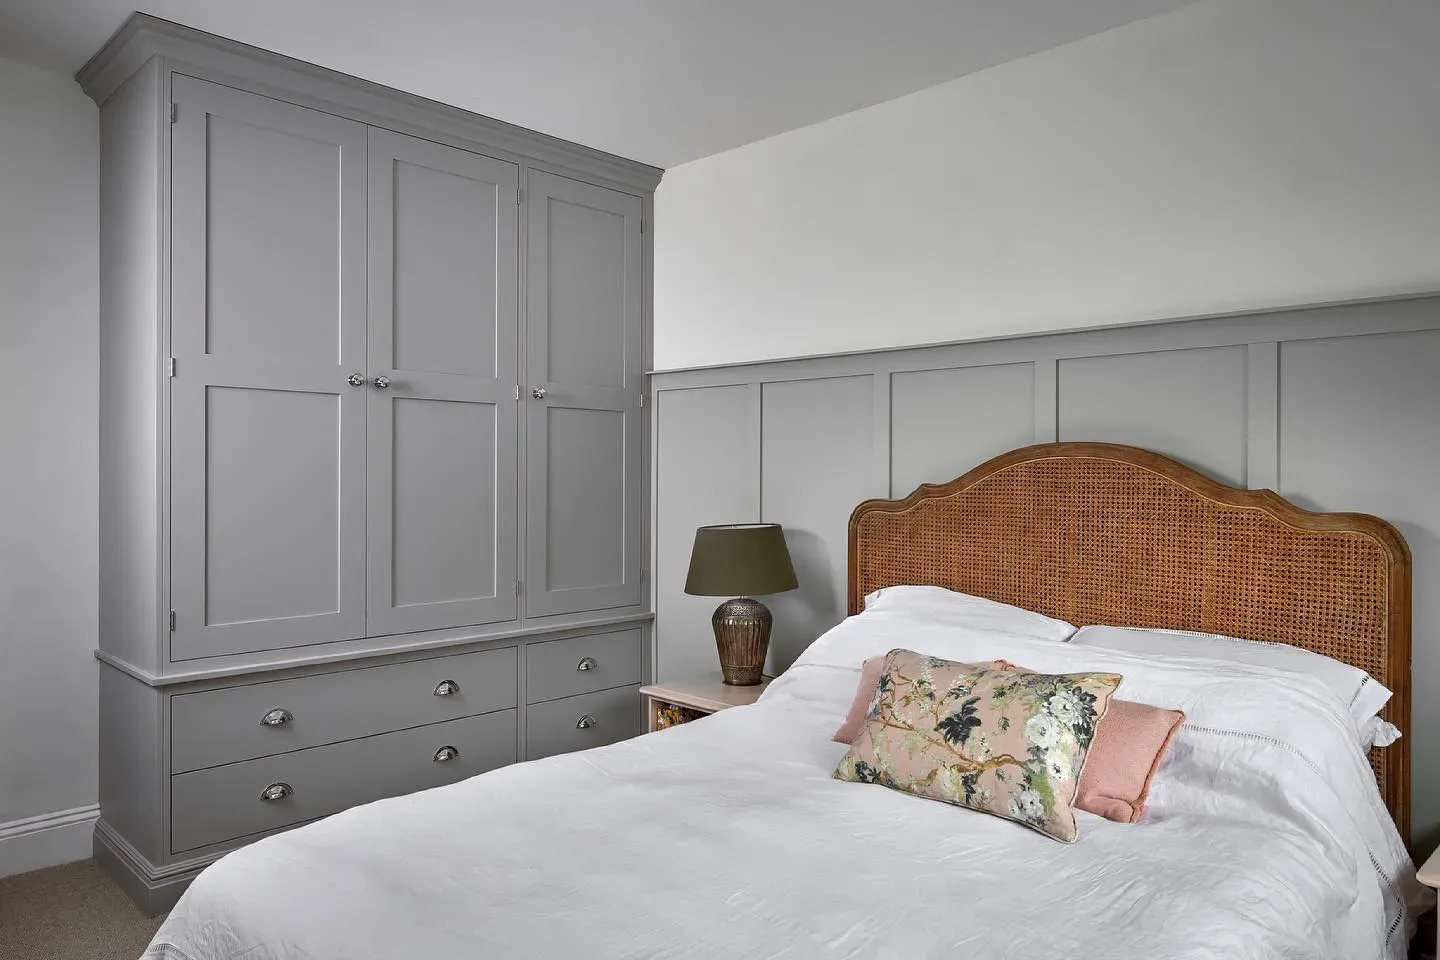 Farrow and Ball Pavilion Gray 242 bedroom panelling